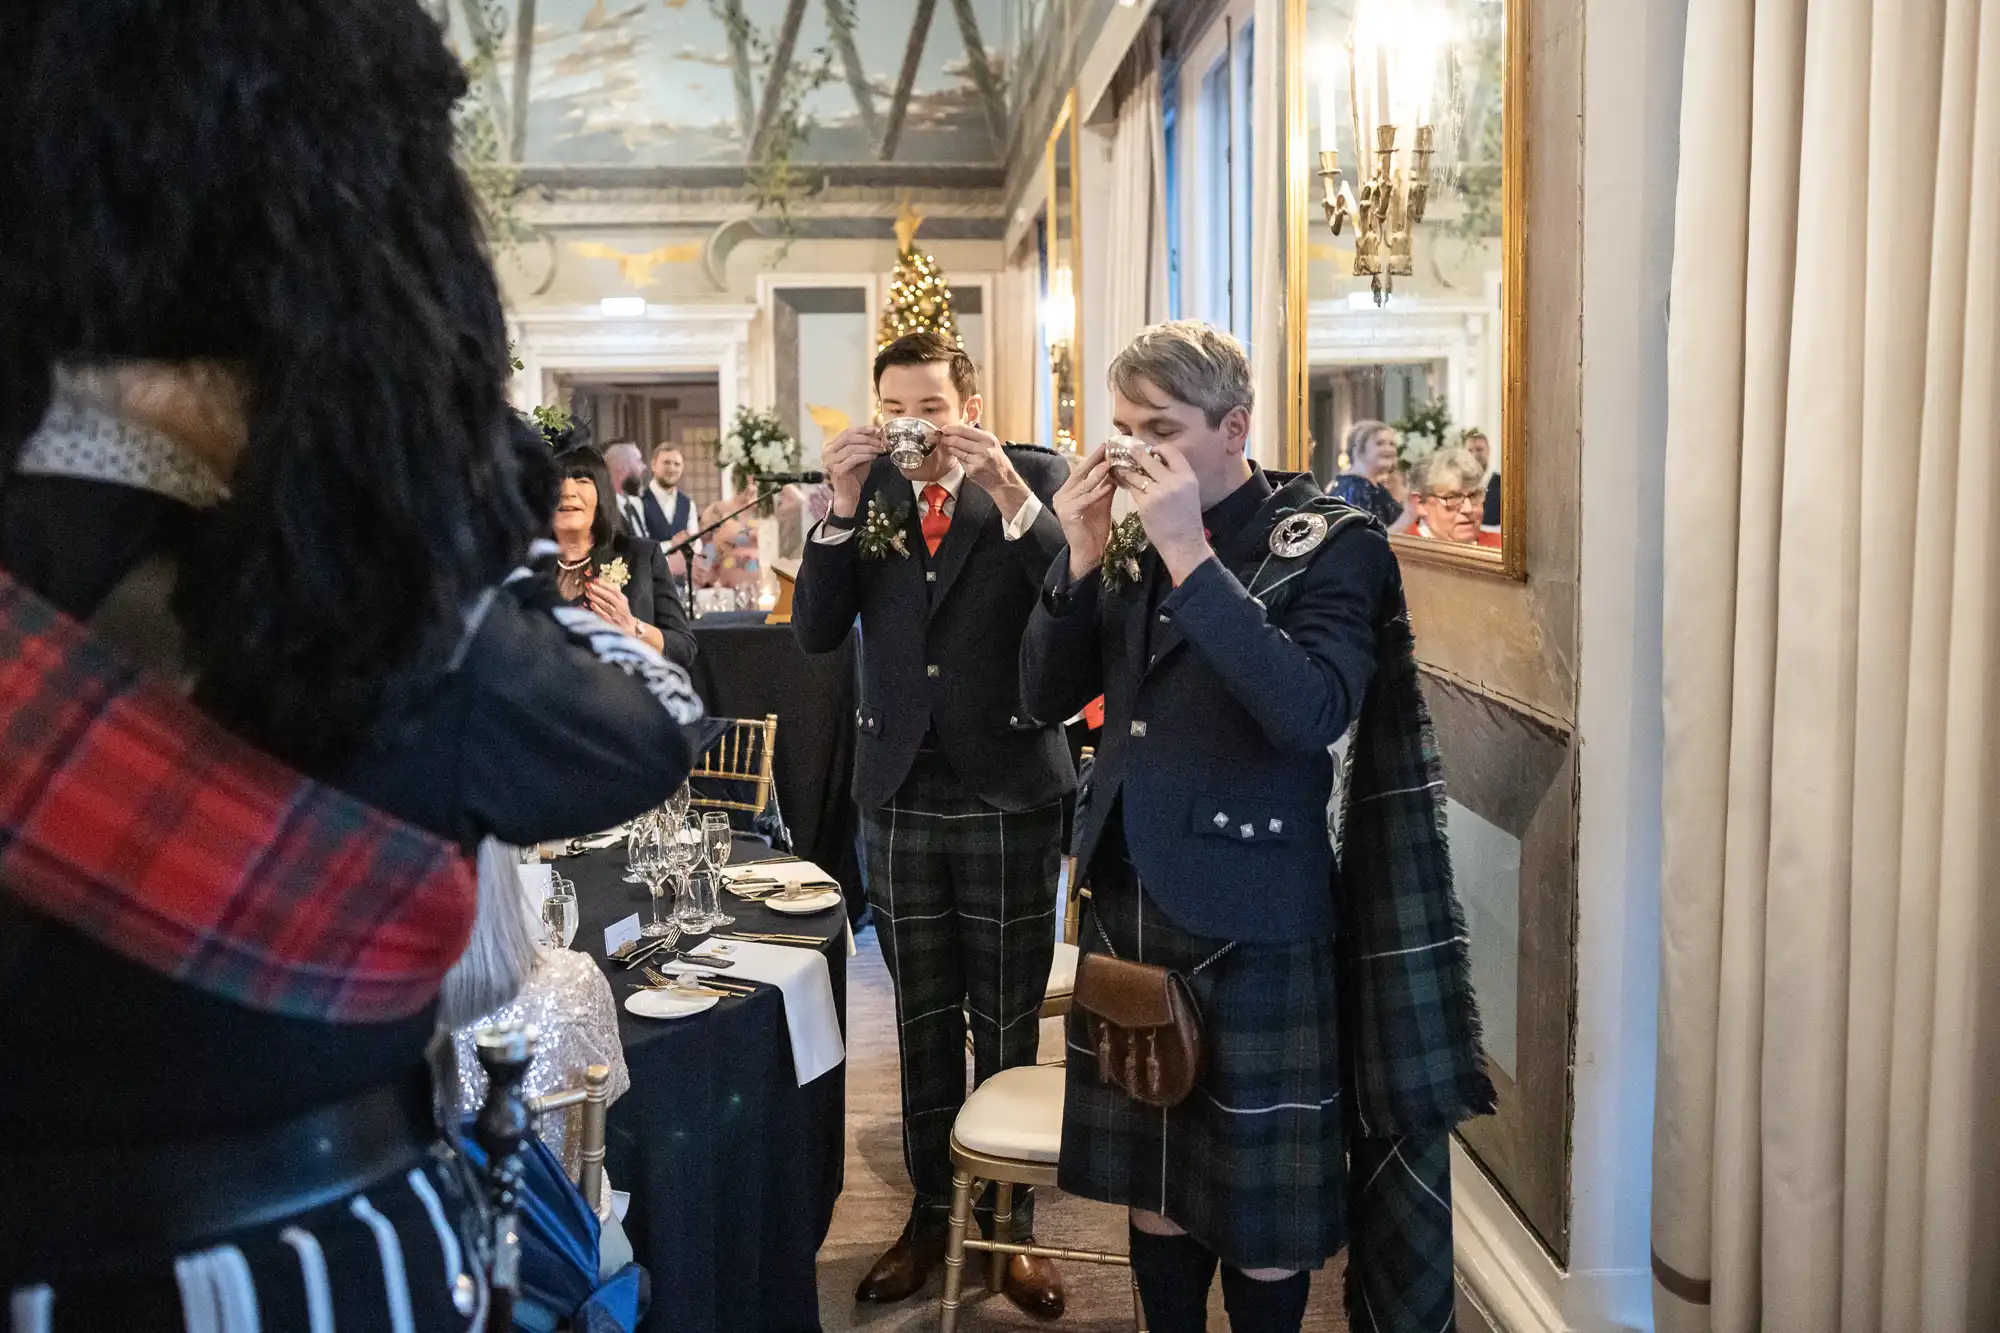 Two people in kilts and matching attire participate in a traditional toasting ceremony in an elegant room with a Christmas tree. They raise small glasses, while others look on.